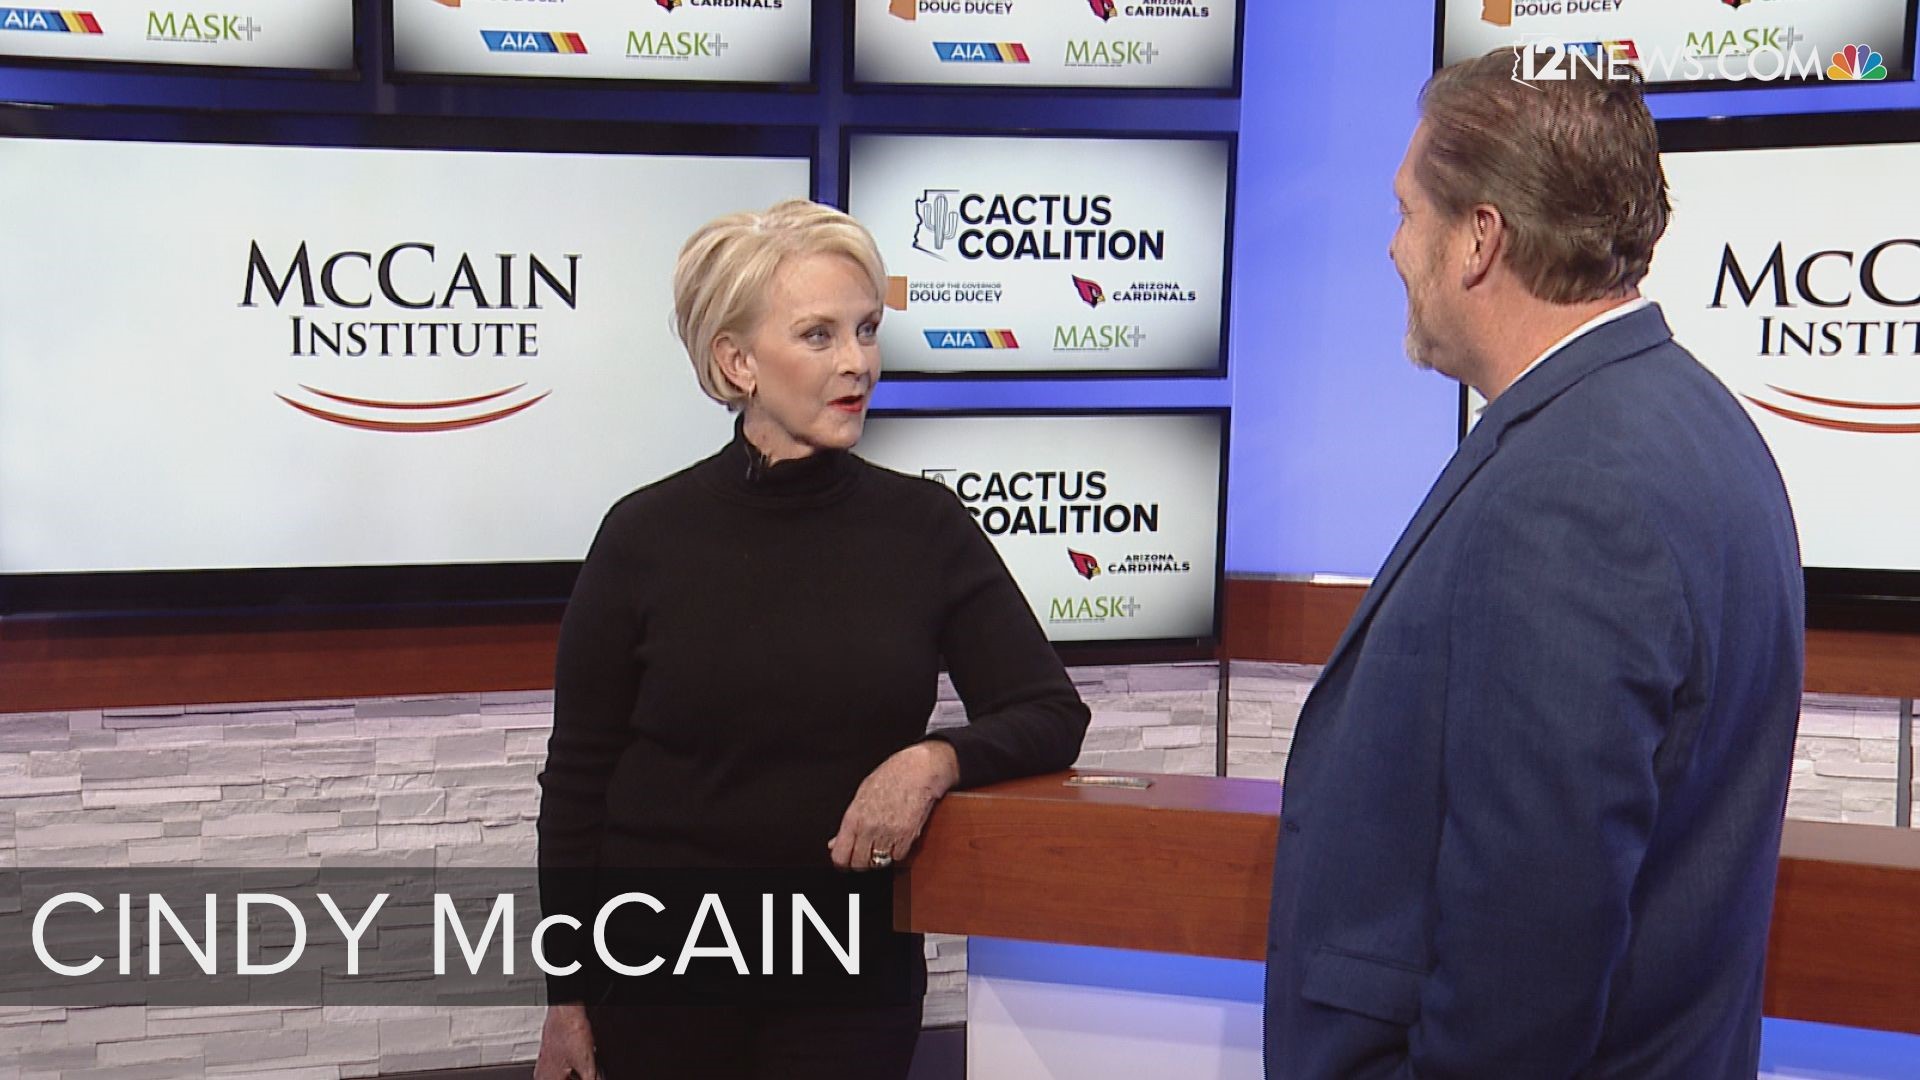 McCain, the widow of Arizona Senator John McCain, values solving problems as a community. 12 News President and GM Dean Ditmer talked to McCain about the coalition.